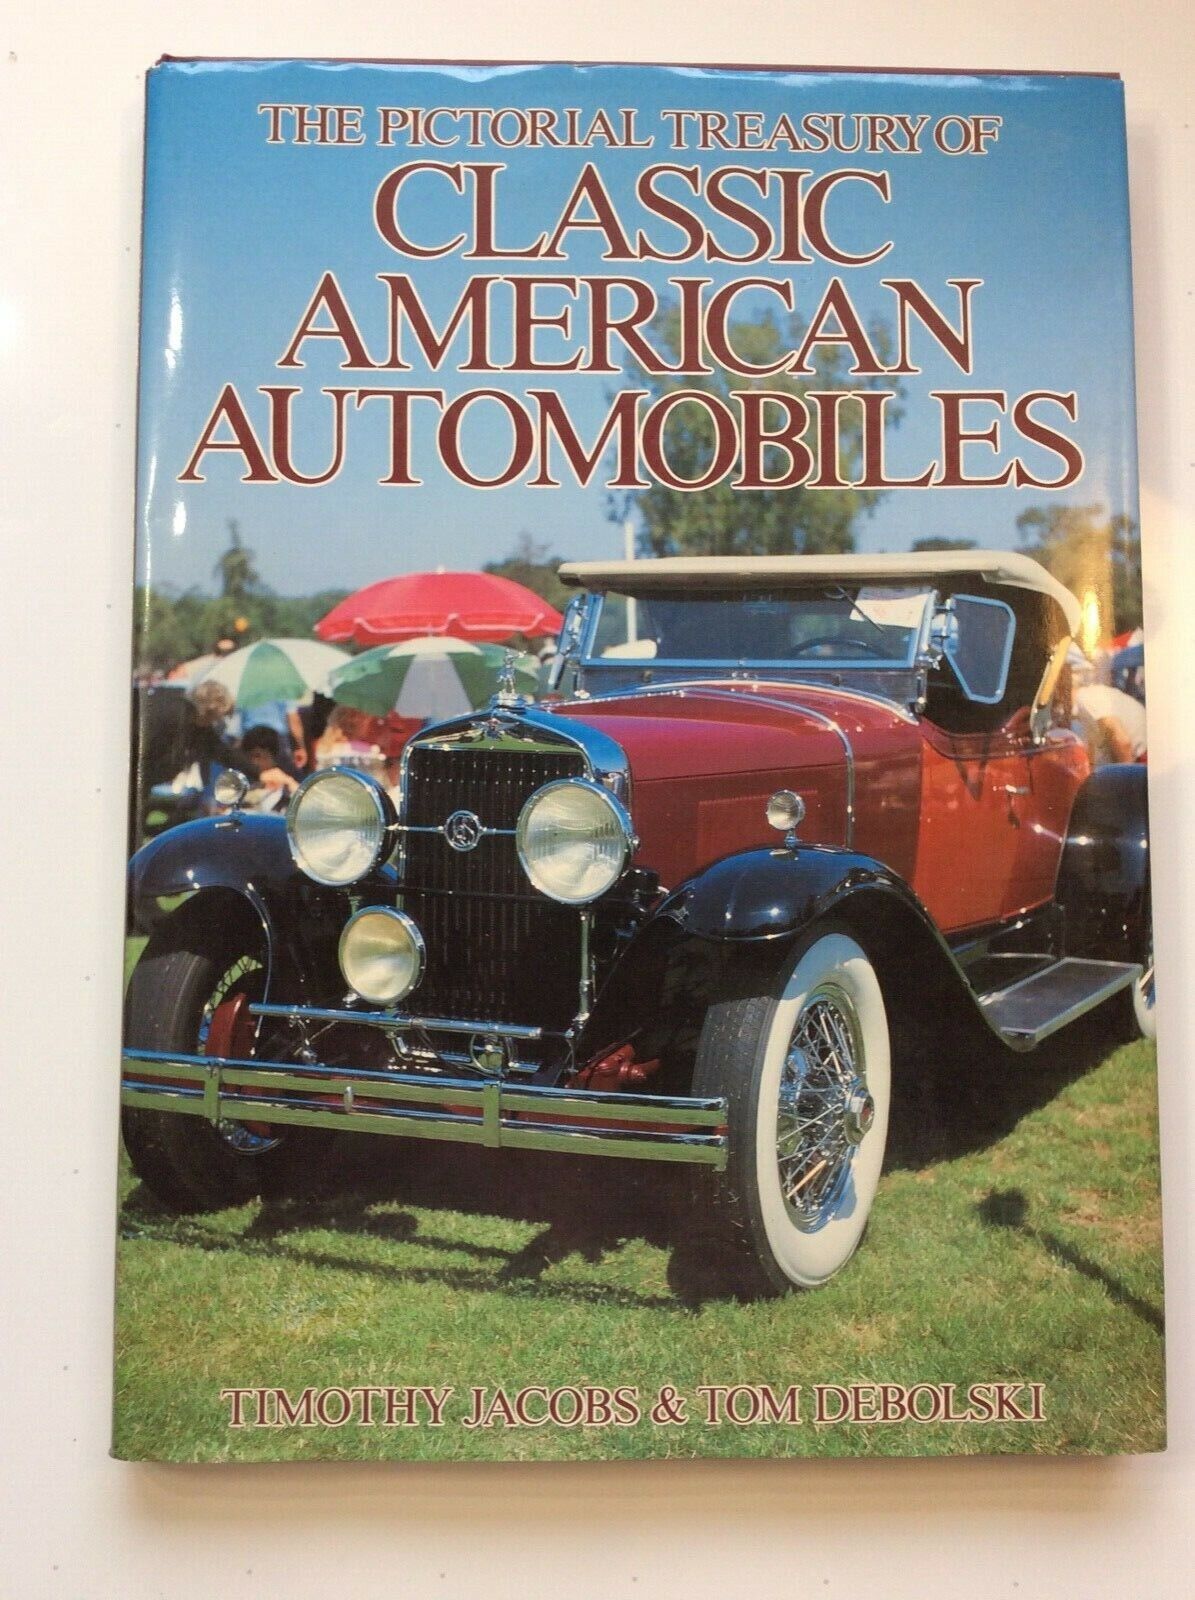 THE PICTORIAL TREASURY OF CLASSIC AMERICAN AUTOMOBILES